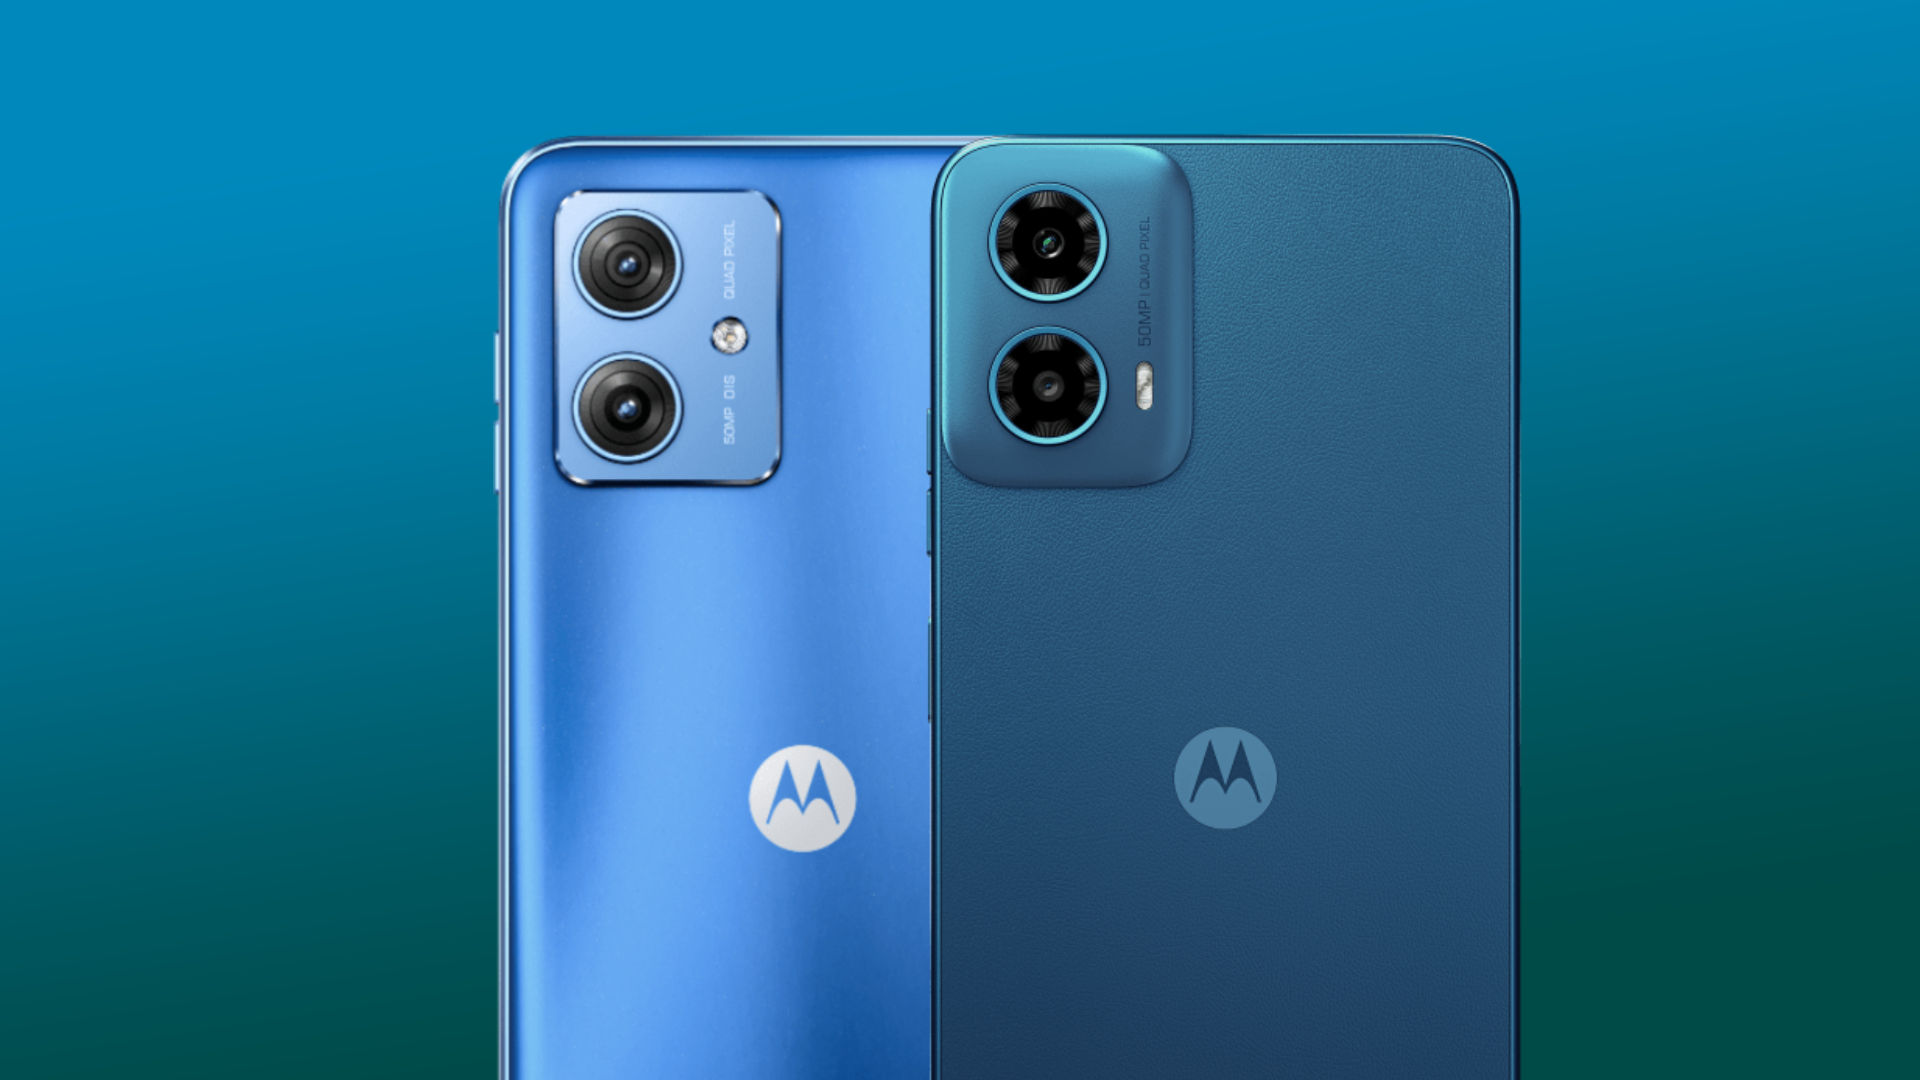 Motorola G54 introduced - China and India get different versions